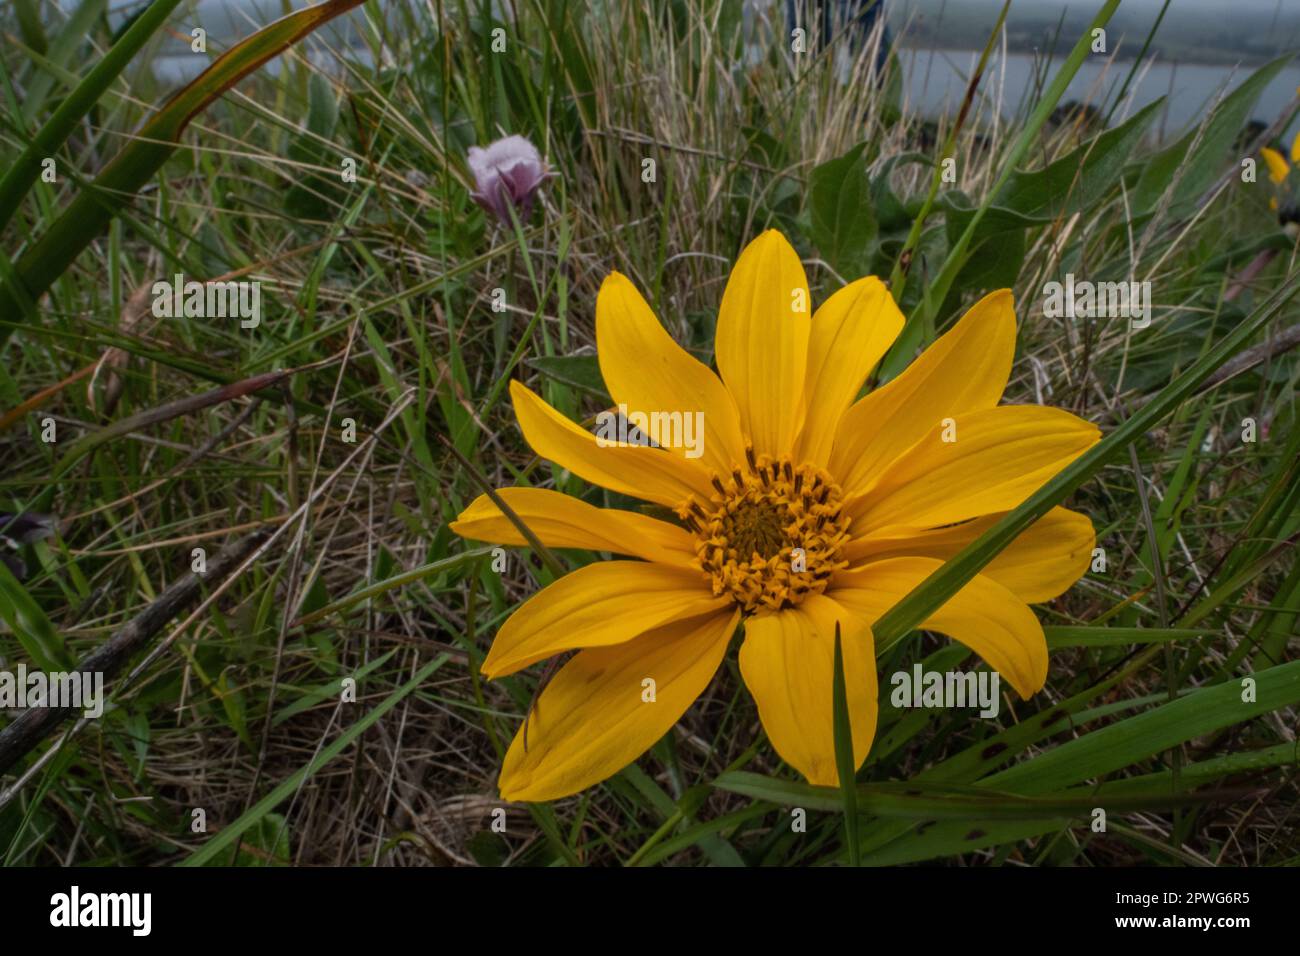 Wyethia angustifolia, the California compassplant or narrowleaf mule's ears flowering in a grassland in Point Reyes national seashore in Marin county. Stock Photo